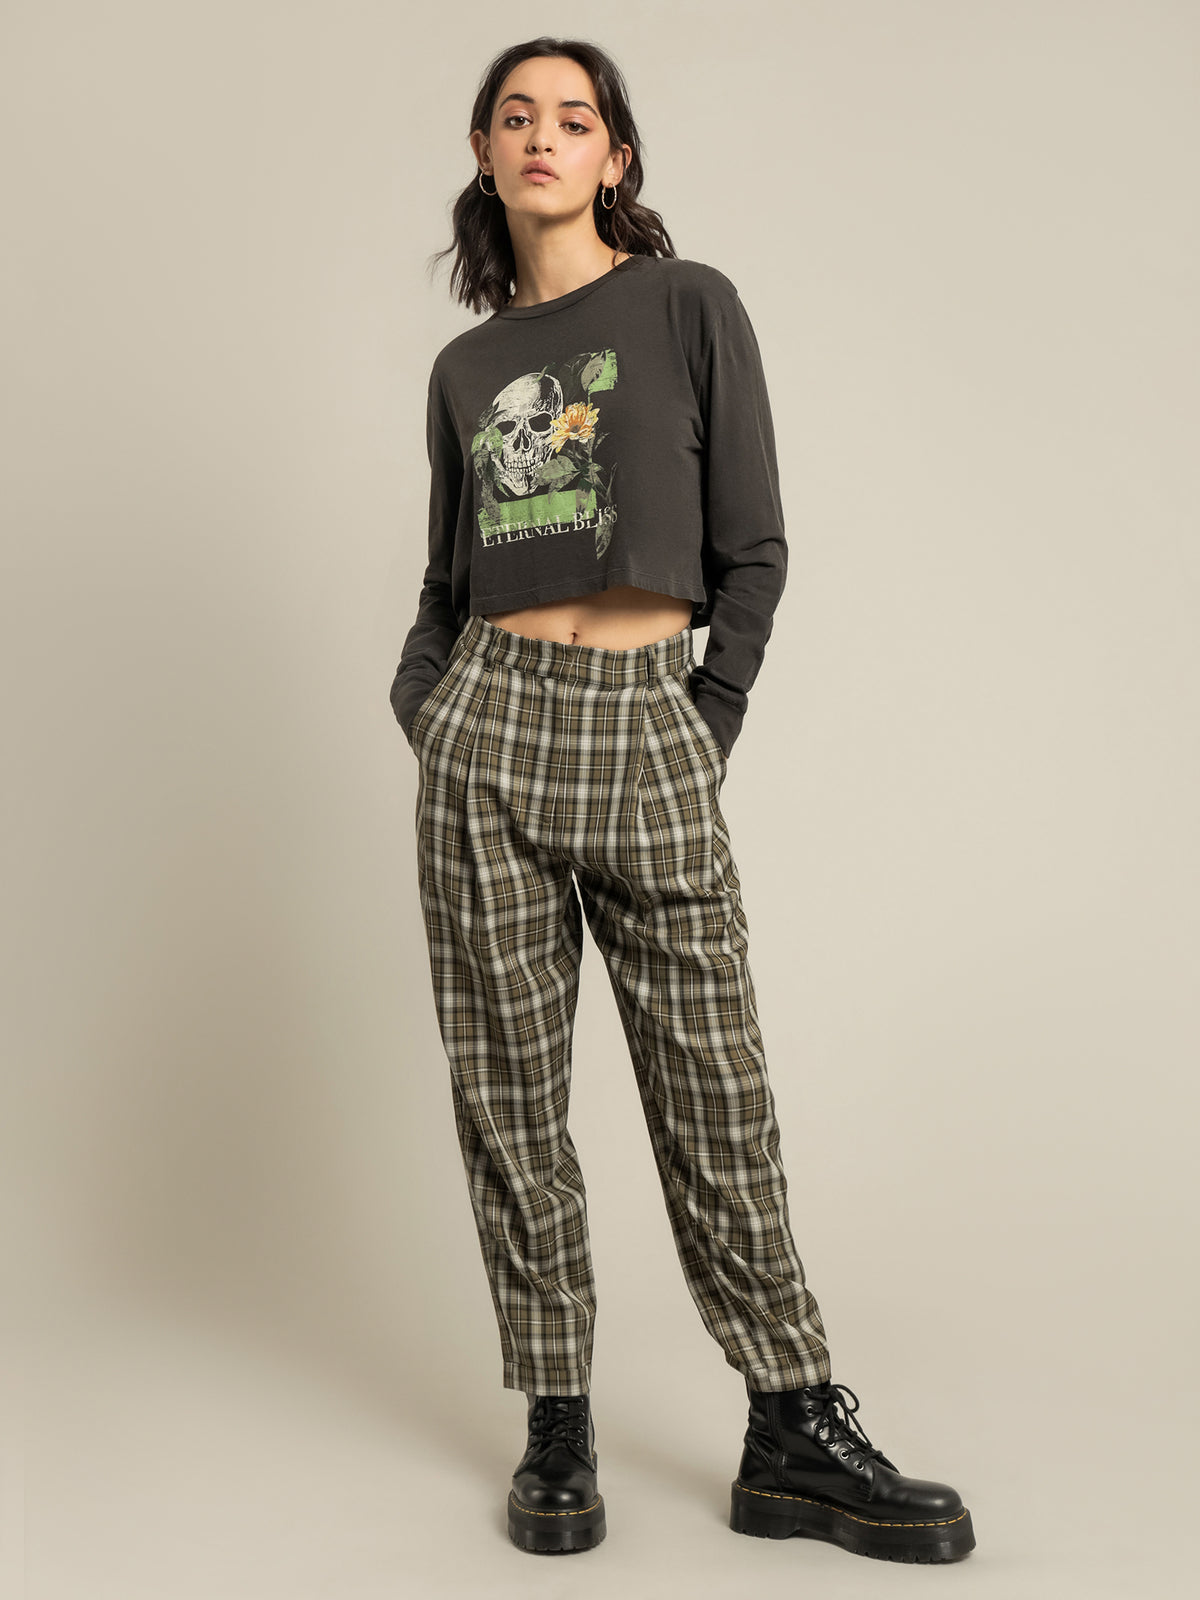 Eternal Bliss Long Sleeve Cropped T-Shirt in Washed Black